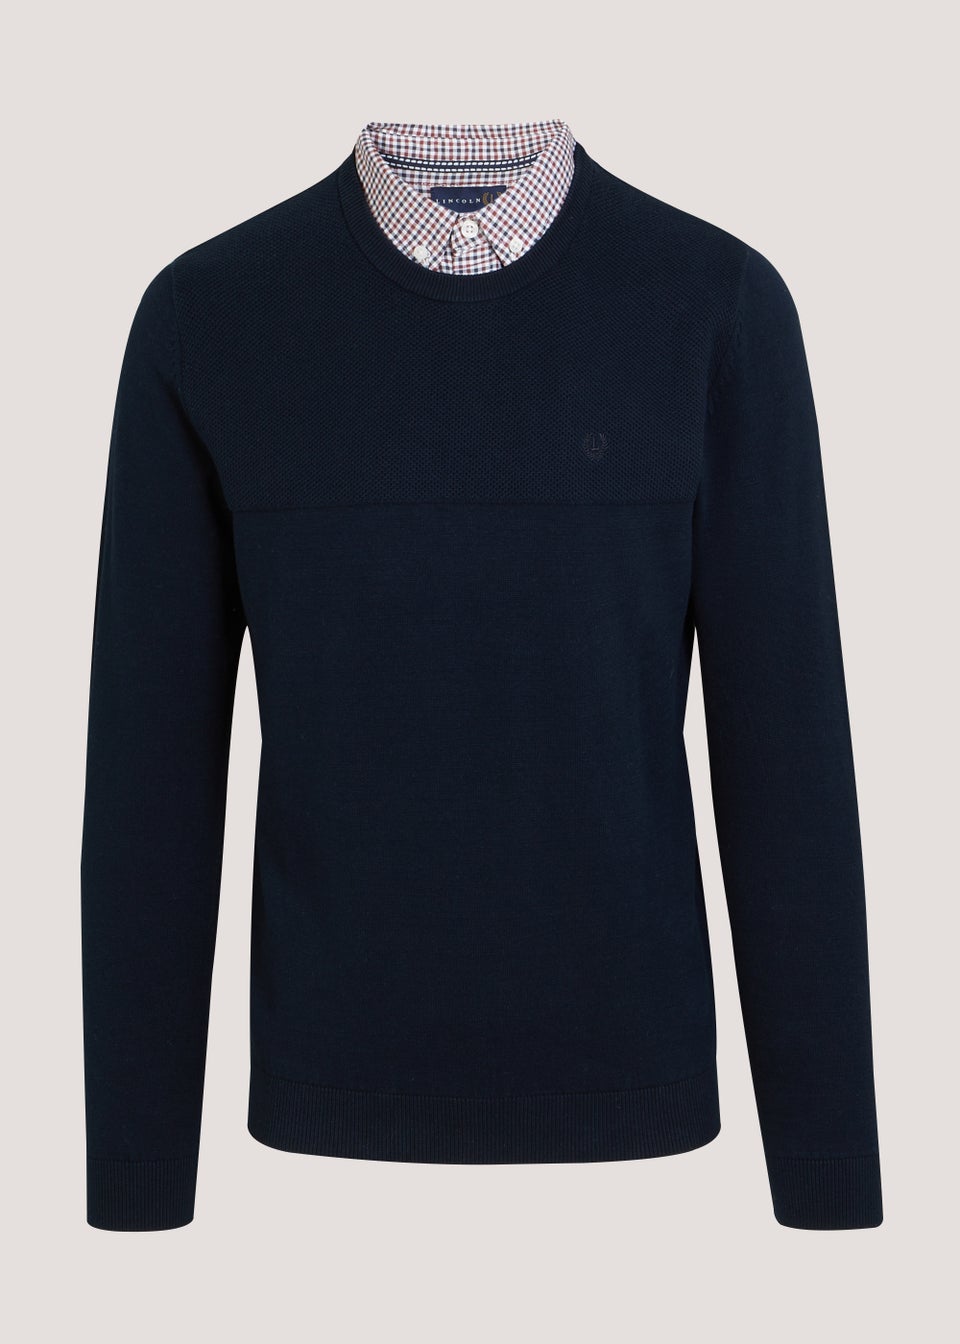 Lincoln Navy Mock Crew Knitted Jumper